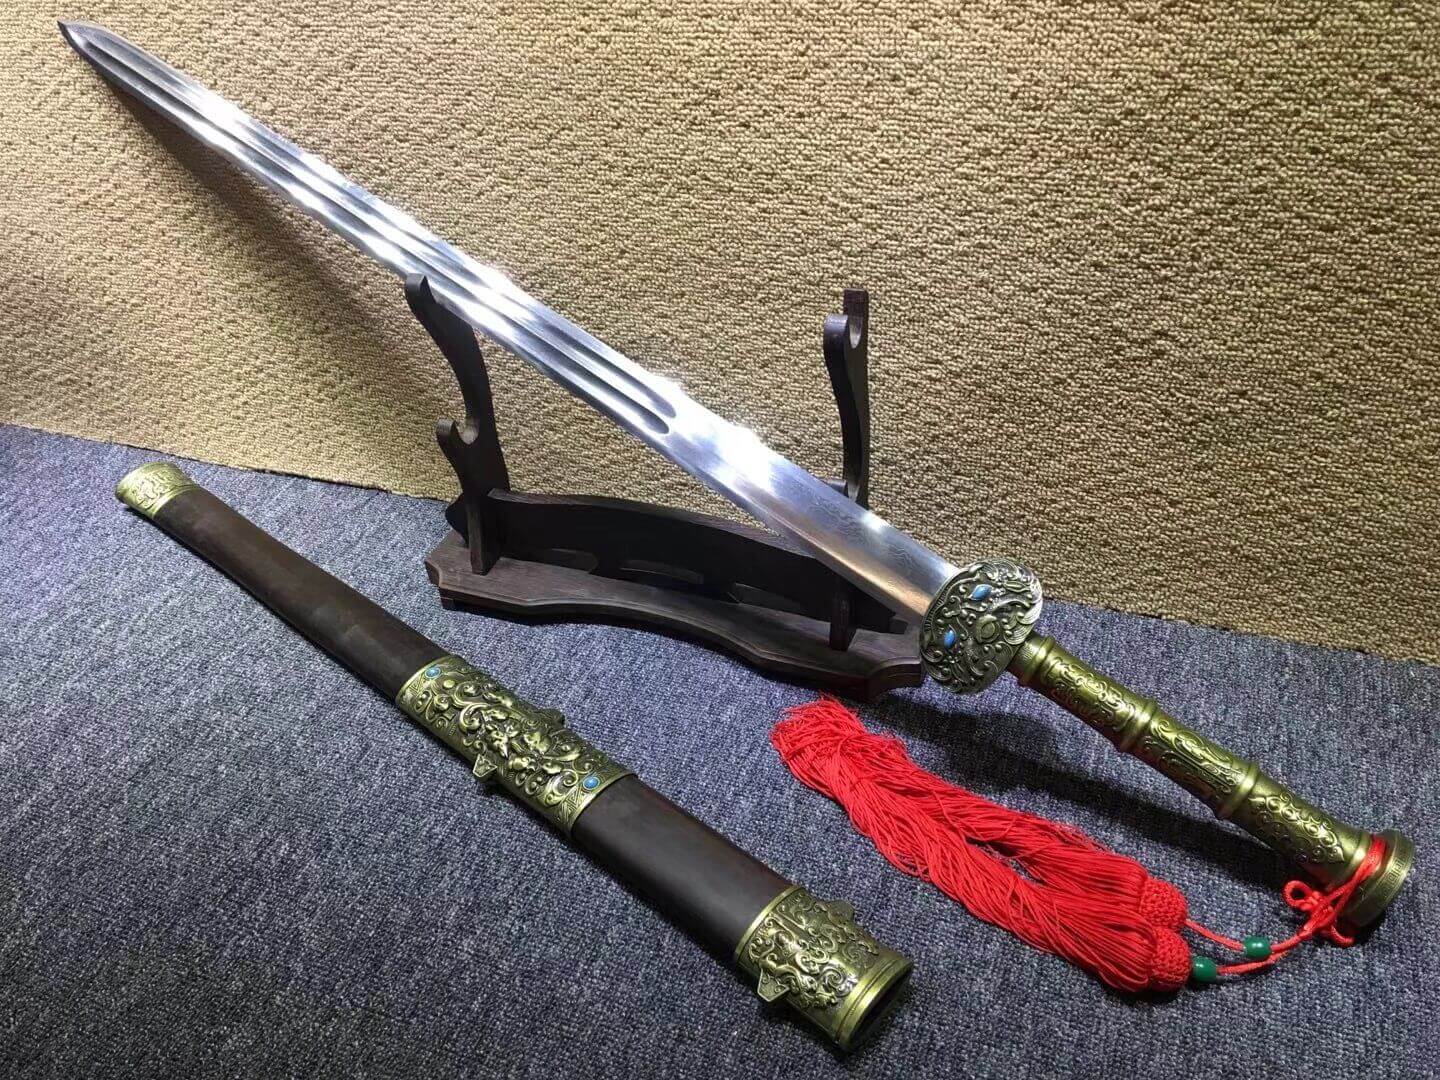 Fengyun sword,Damascus steel blade,Rosewood scabbard,Alloy fitting - Chinese sword shop